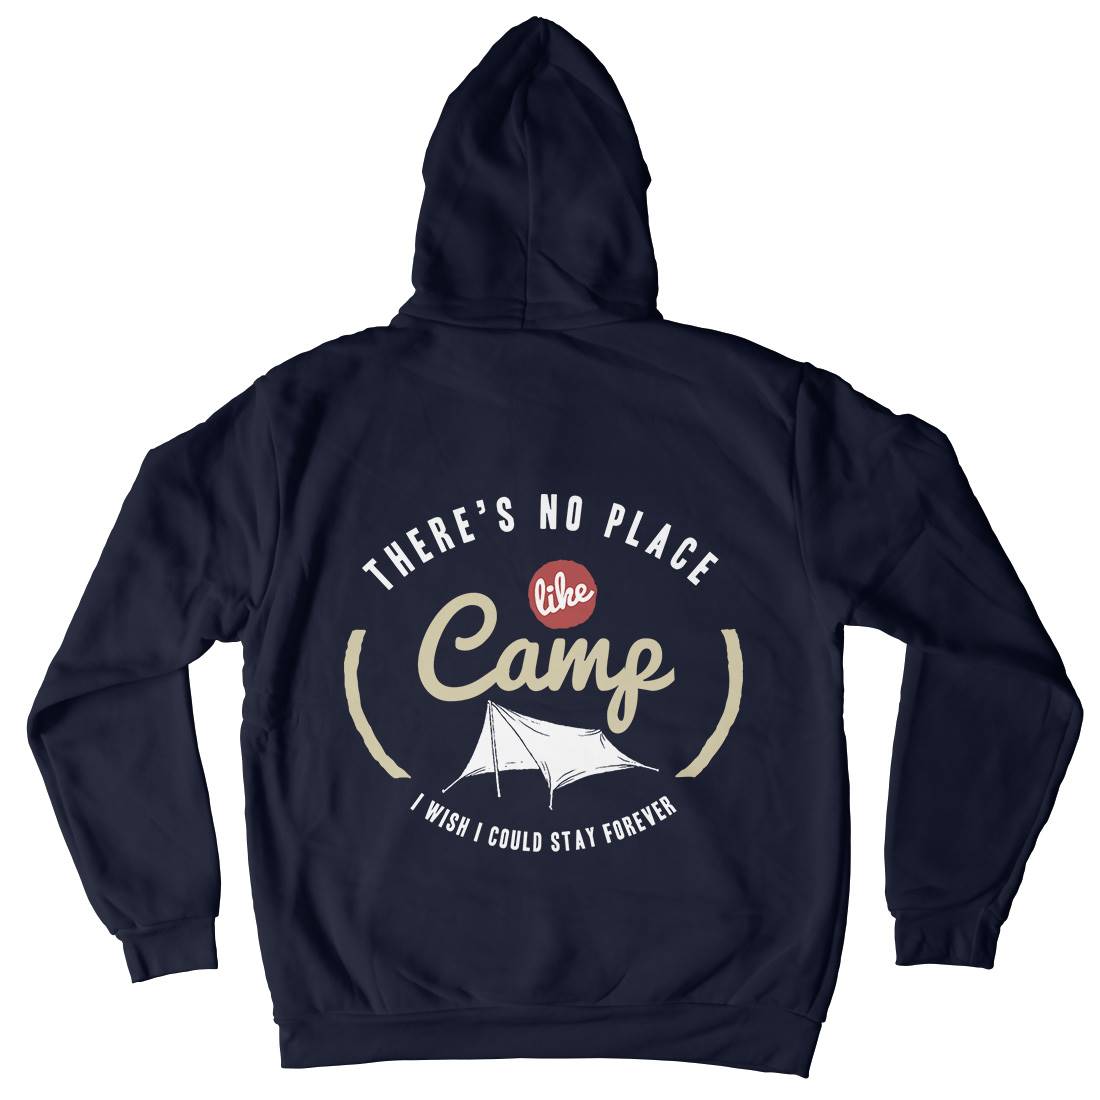 No Place Like Camp Kids Crew Neck Hoodie Nature A353